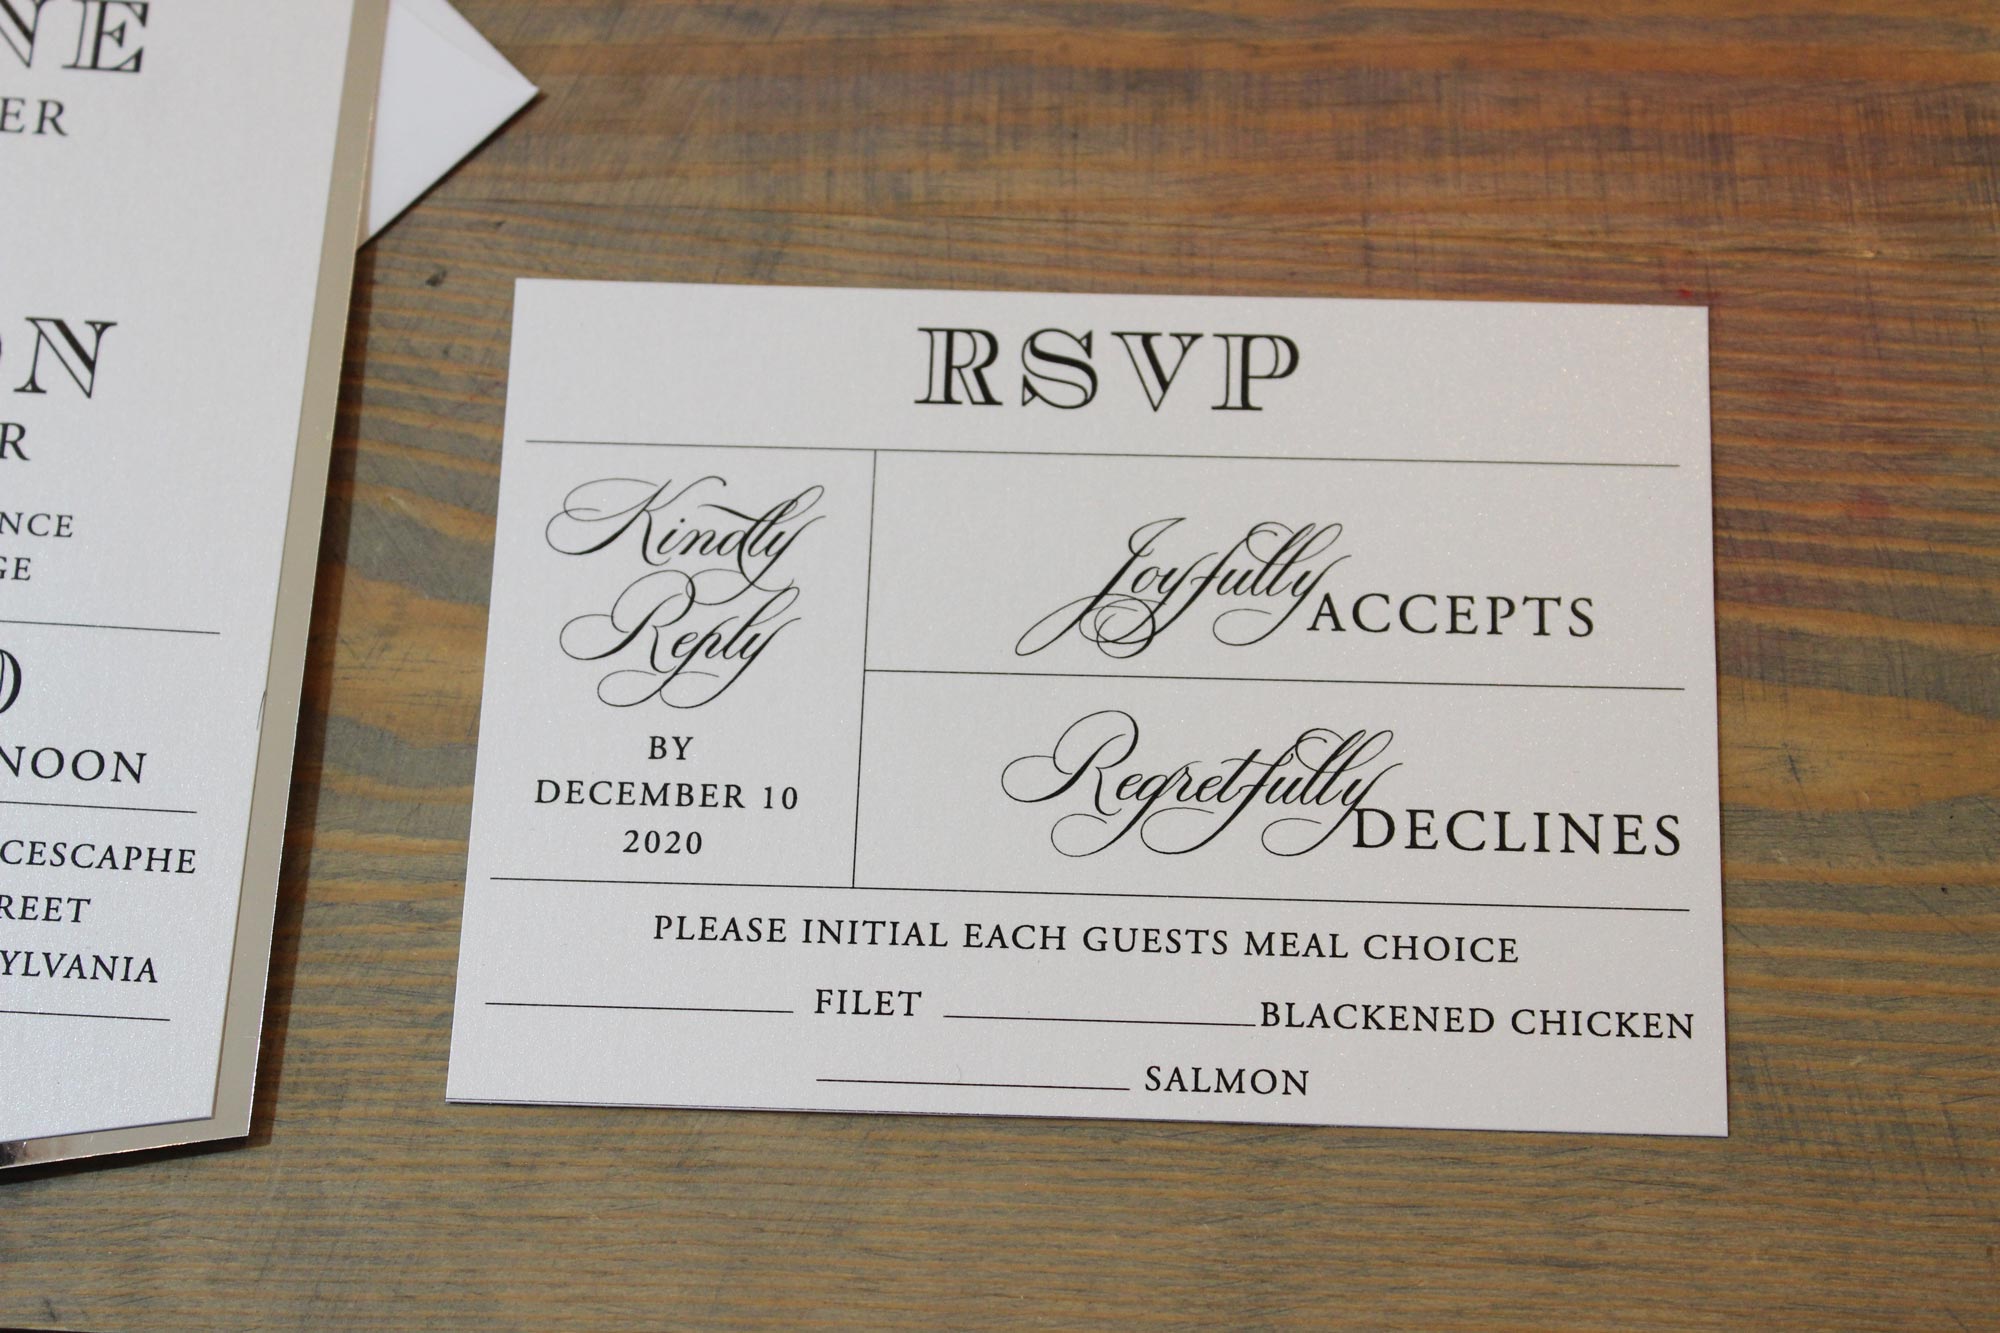 rsvp meaning on invitation